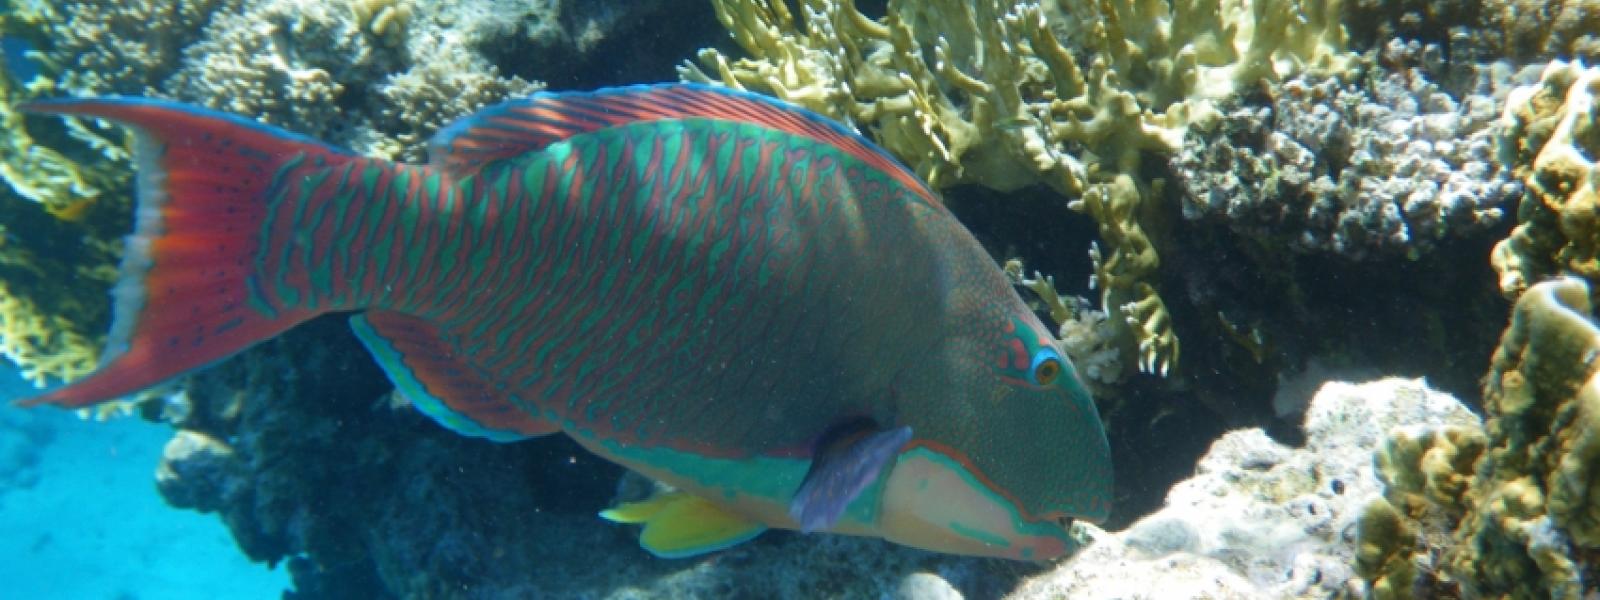 Parrotfish eating algae from corals.